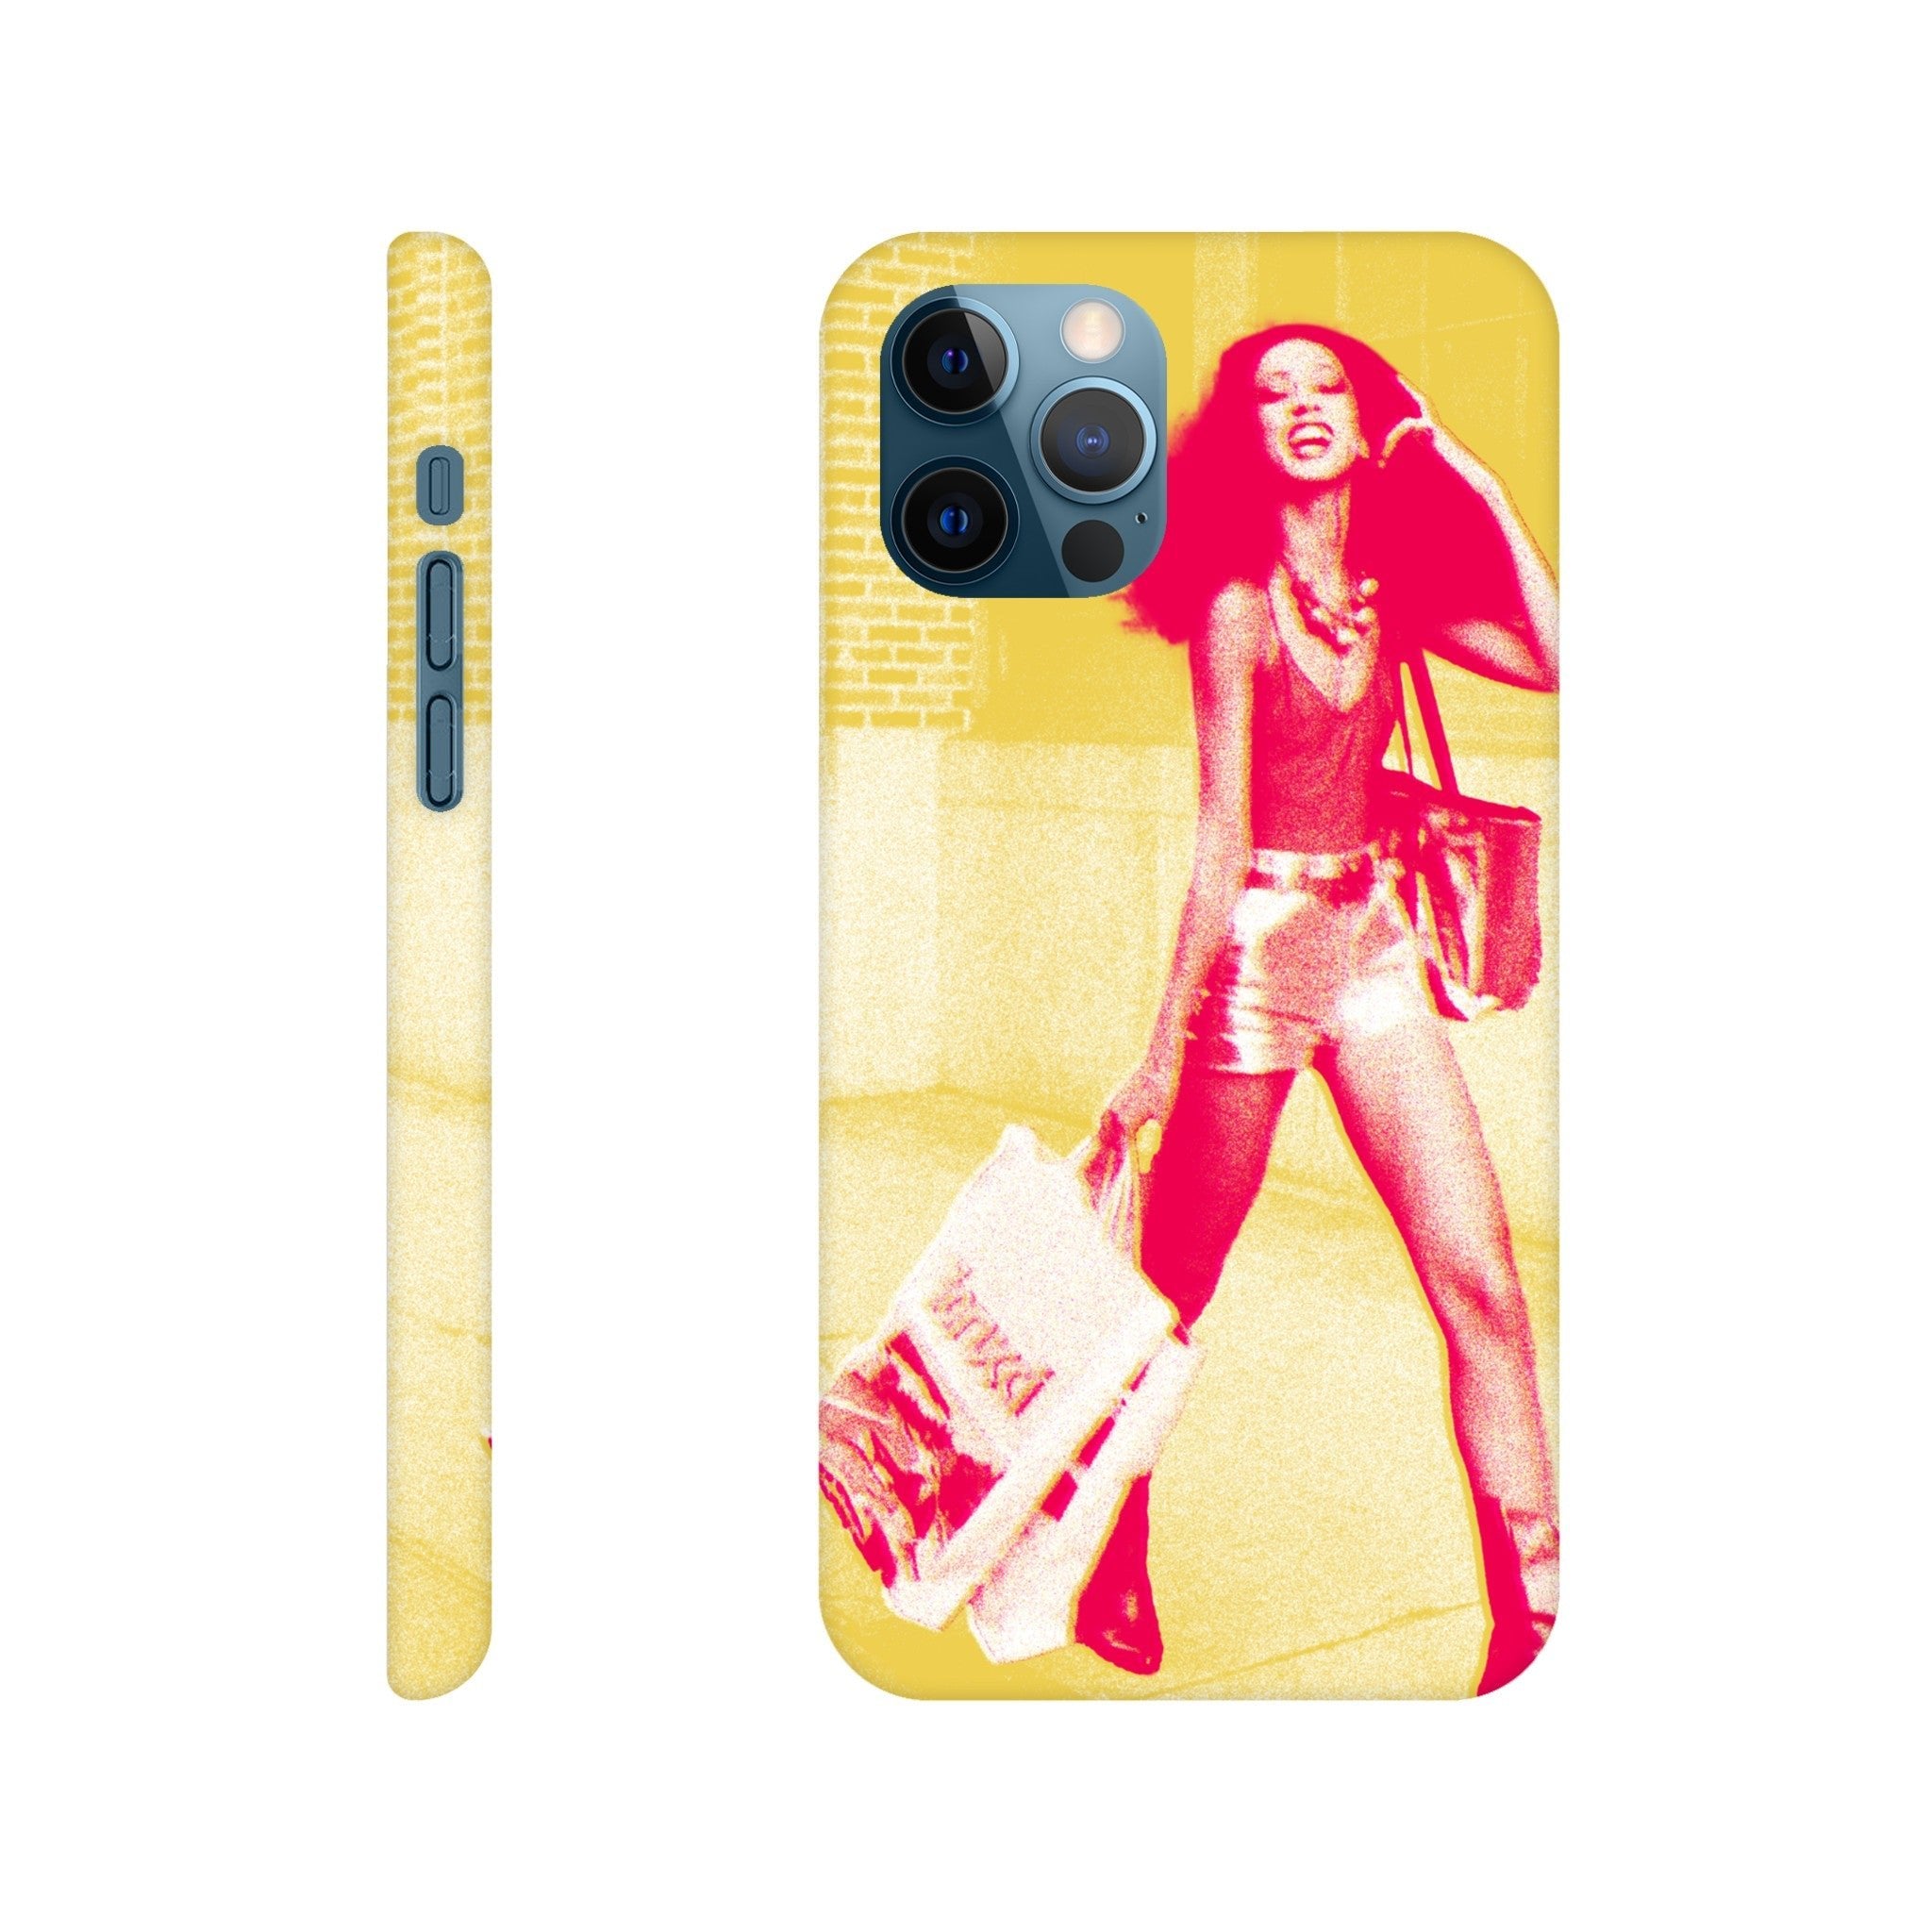 'Retail Therapy' phone case - In Print We Trust